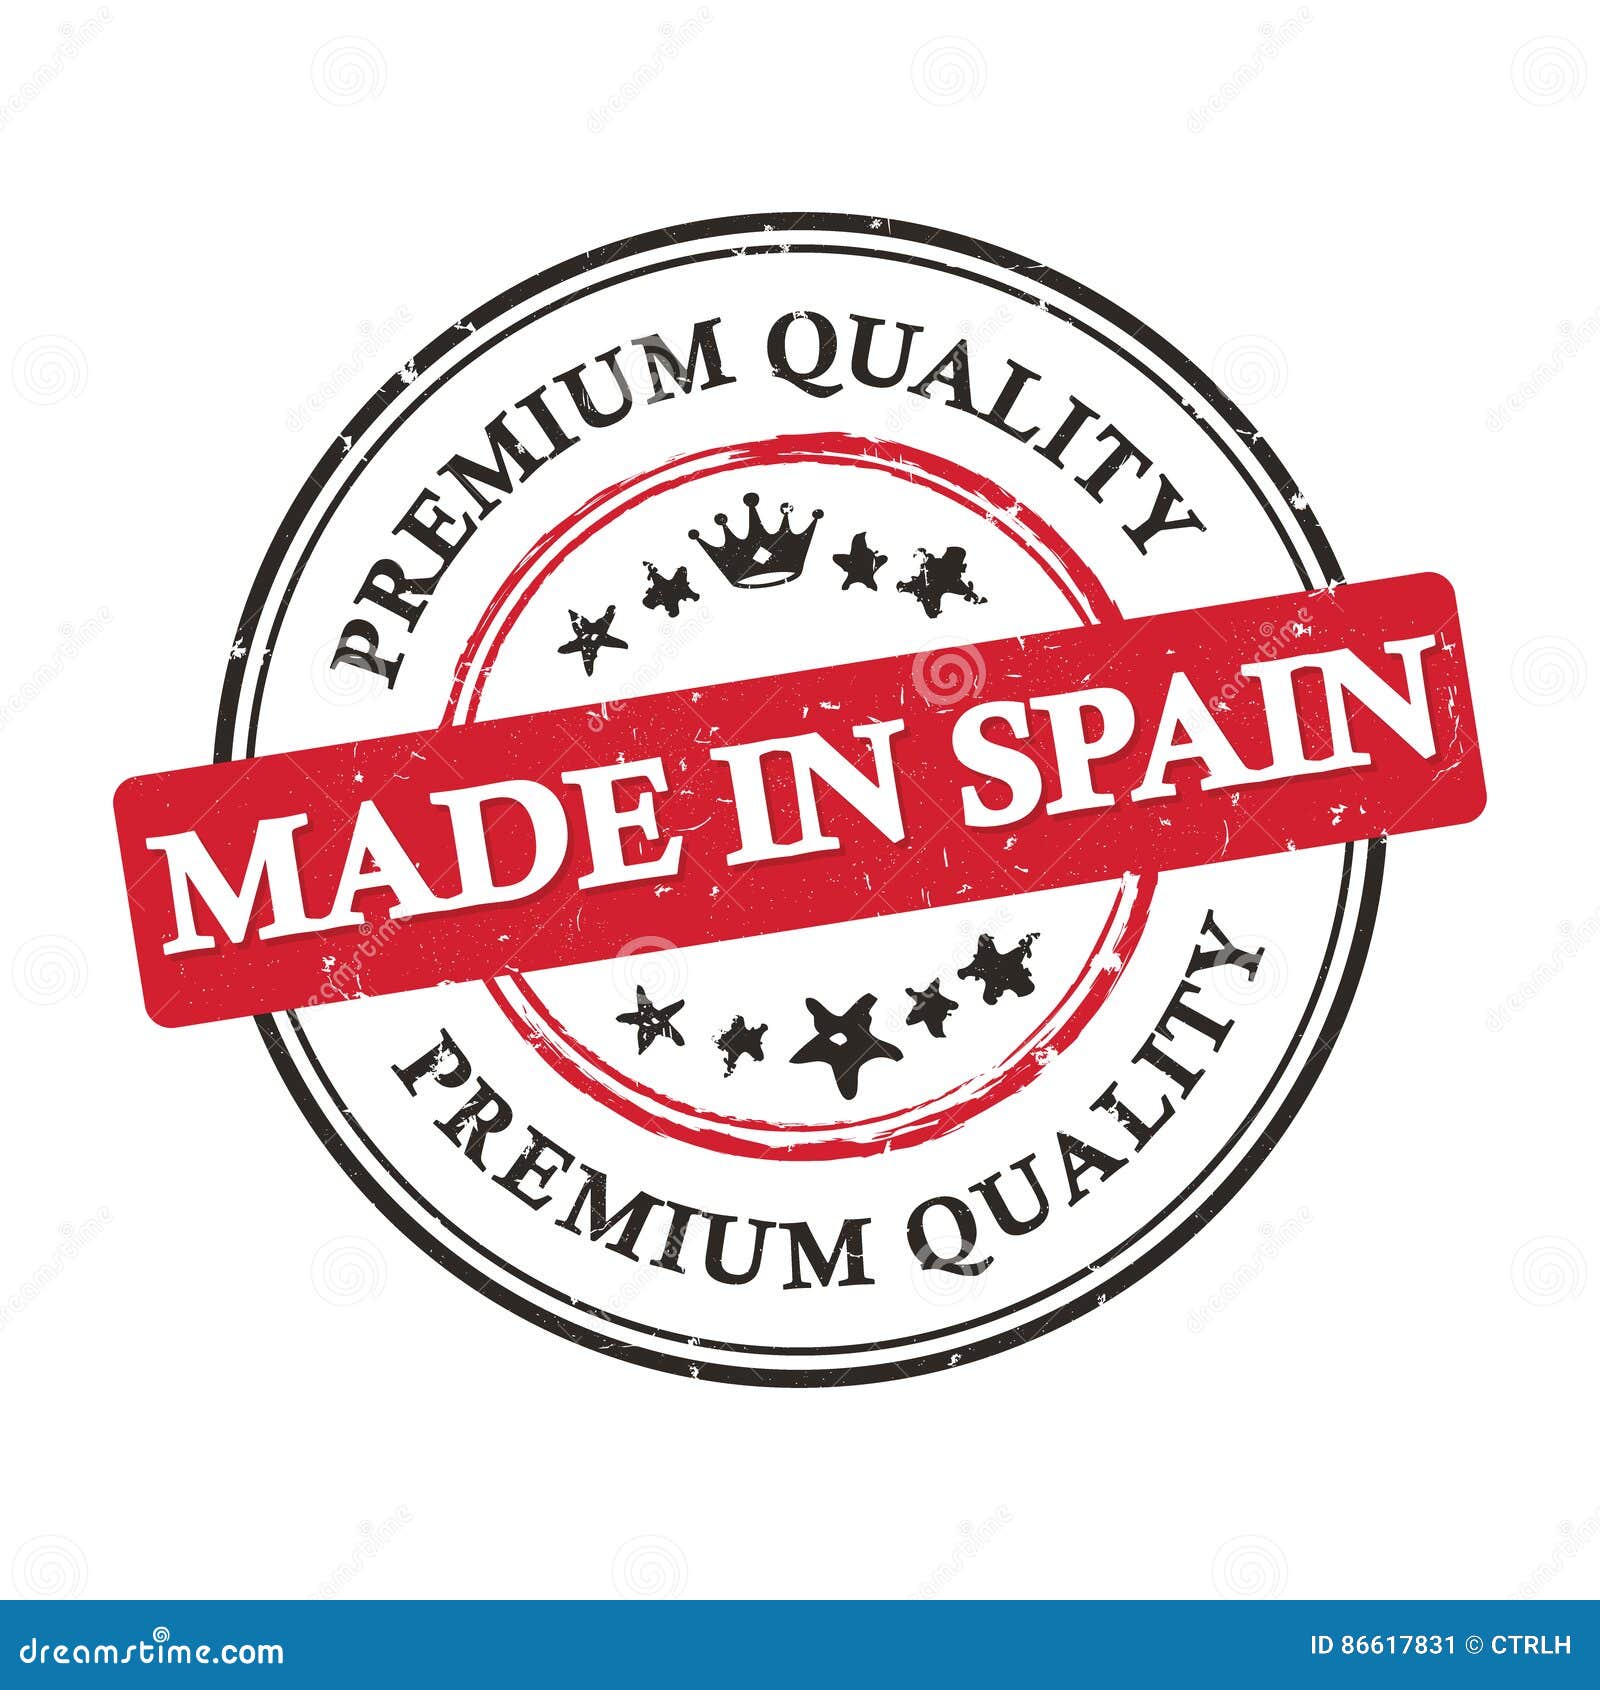 Made in Spain, Premium Quality Printable Banner / Sticker Stock Vector ...